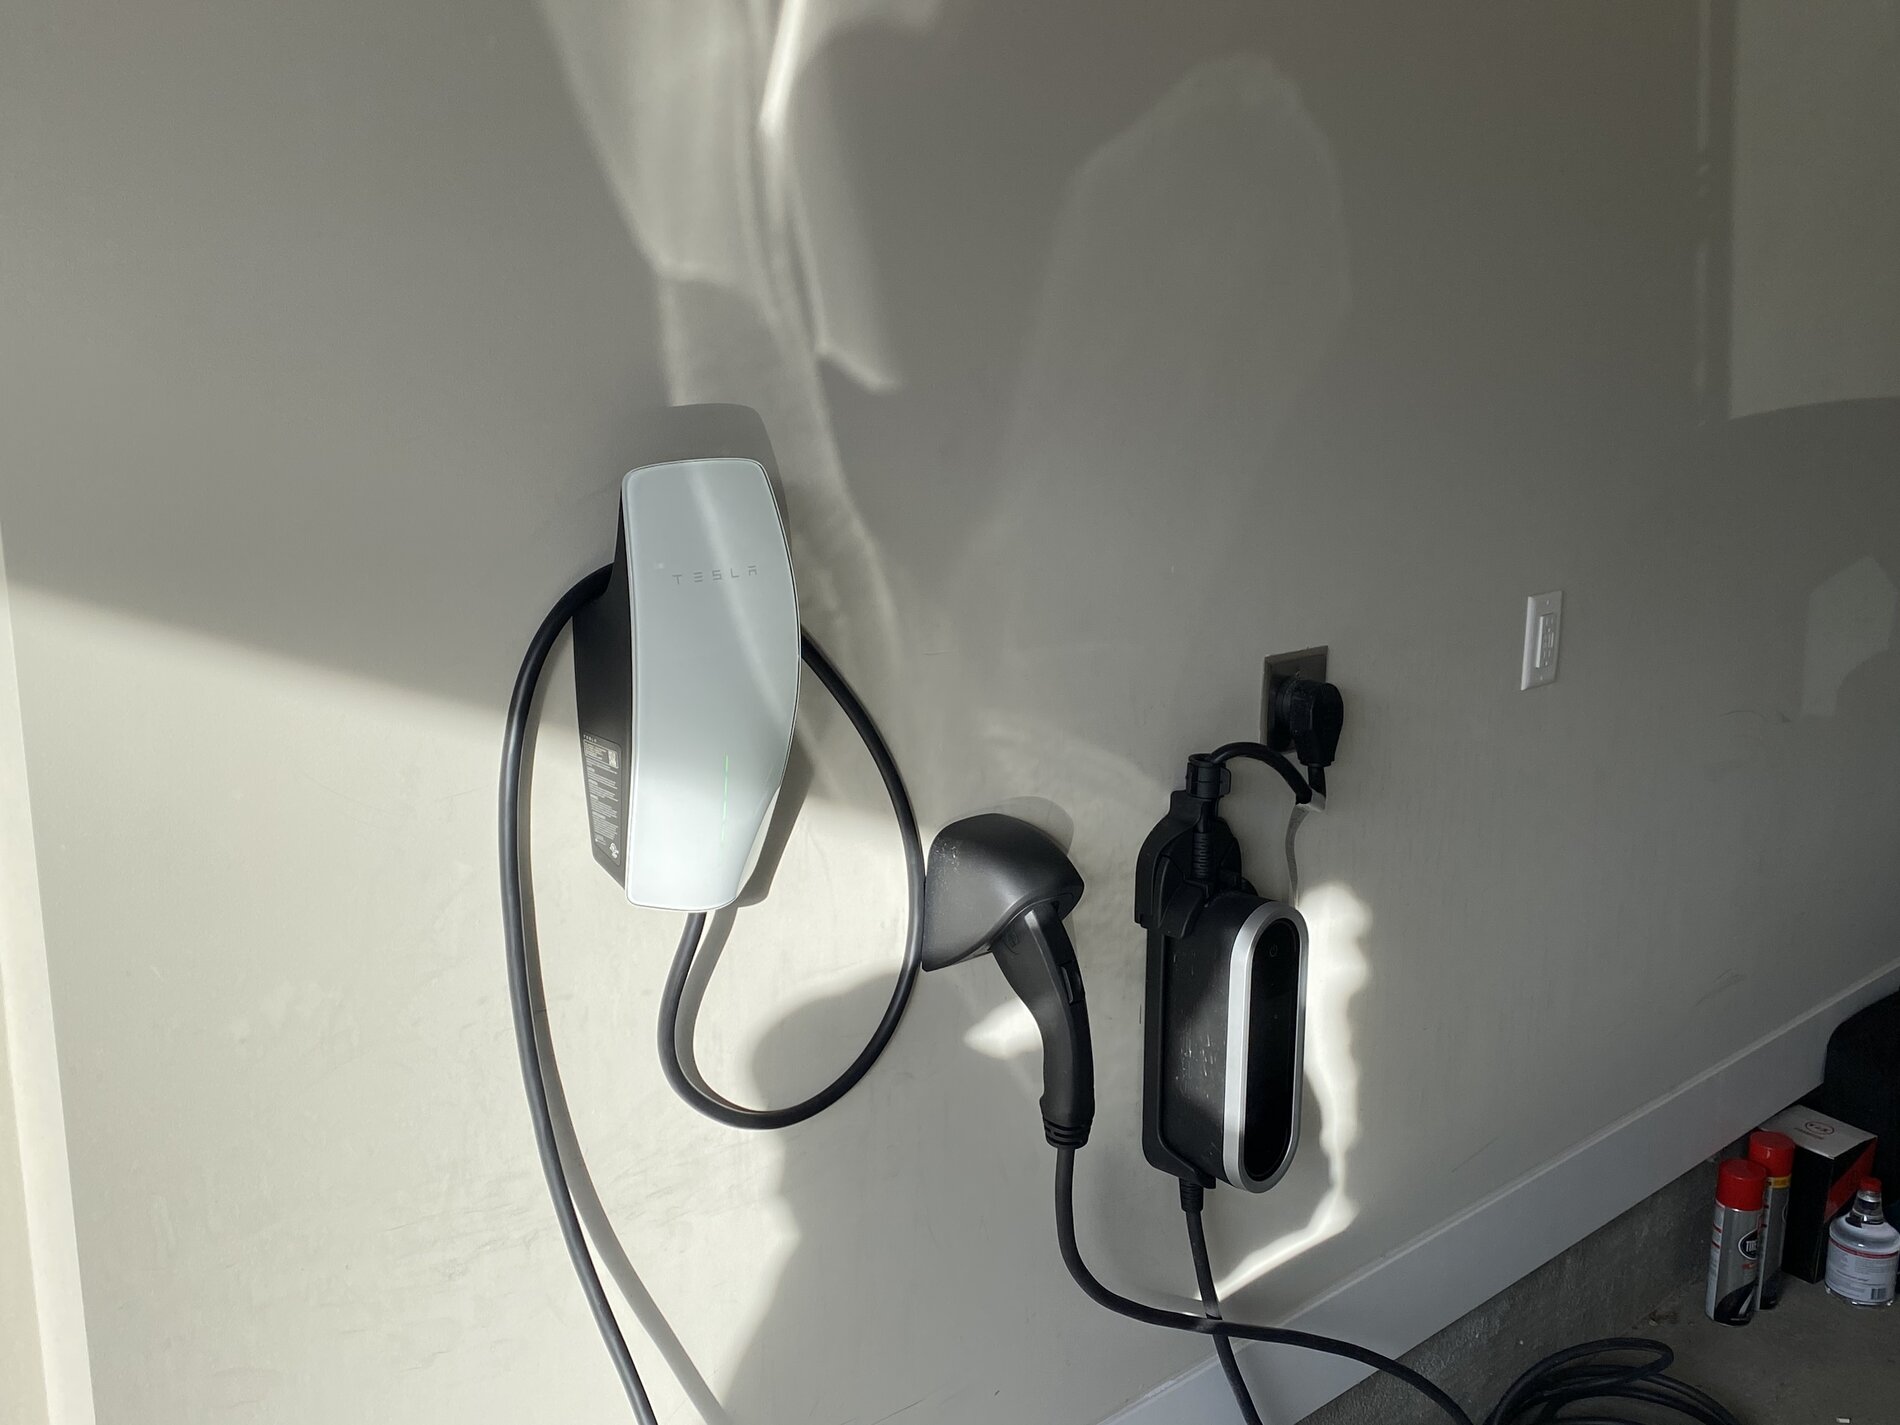 First use of Tesla Gen 3 wall charger and Tesla Tap adapter to